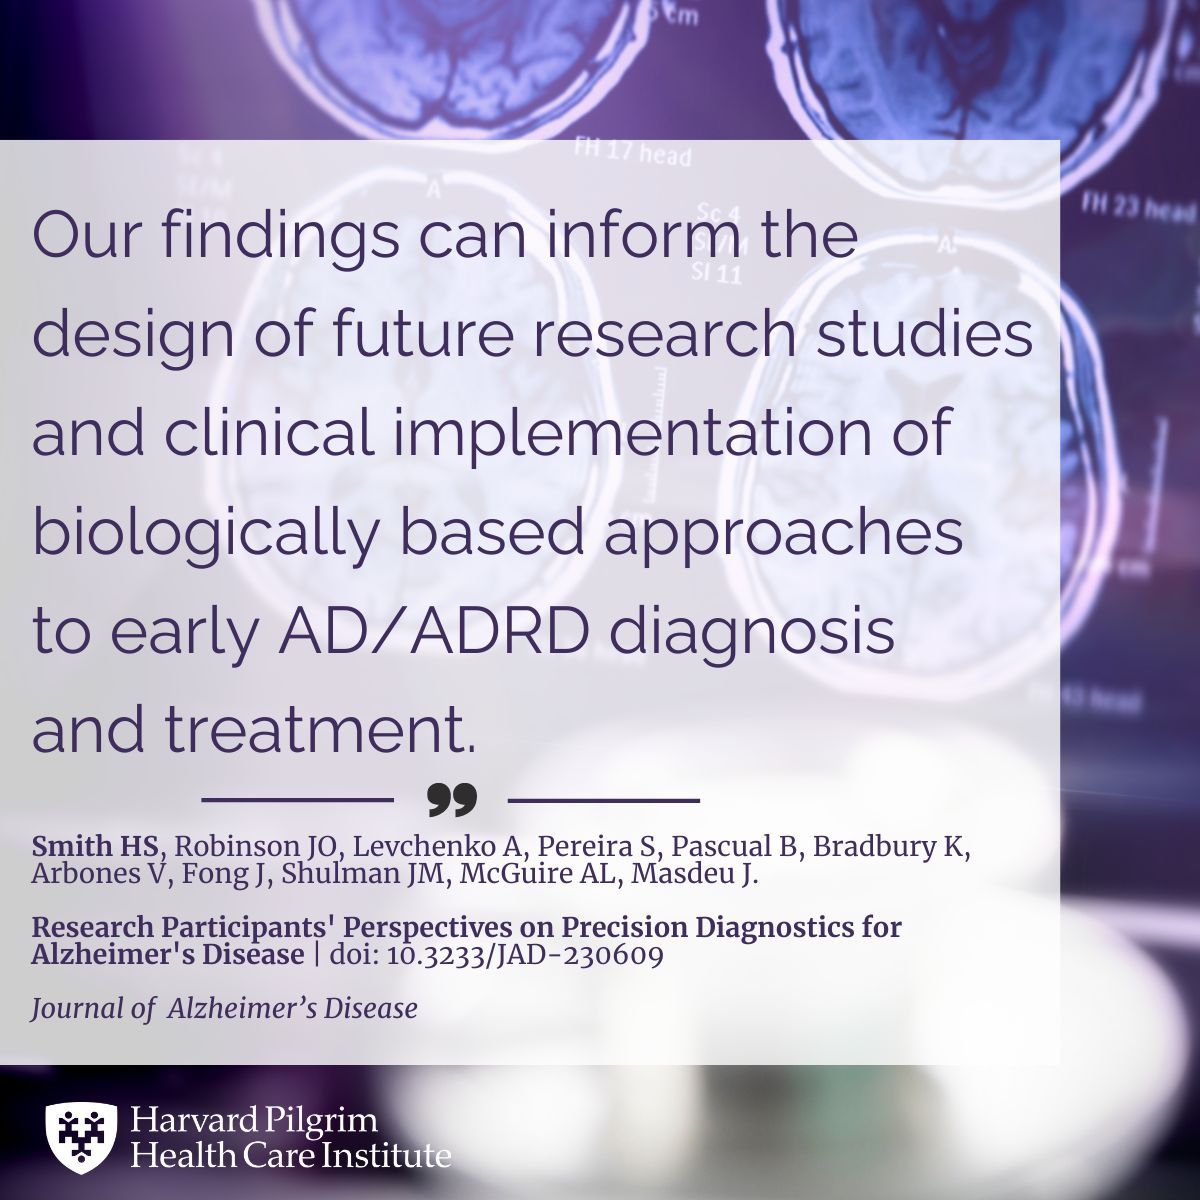 In a survey study of participants who received results of neuroimaging biomarkers of #AlzheimersDisease, participants had high subjective understanding & self-efficacy around their results & interest in #genetictesting. Led by @DeptPopMed's @hadleyssmith: buff.ly/3HOlFXt